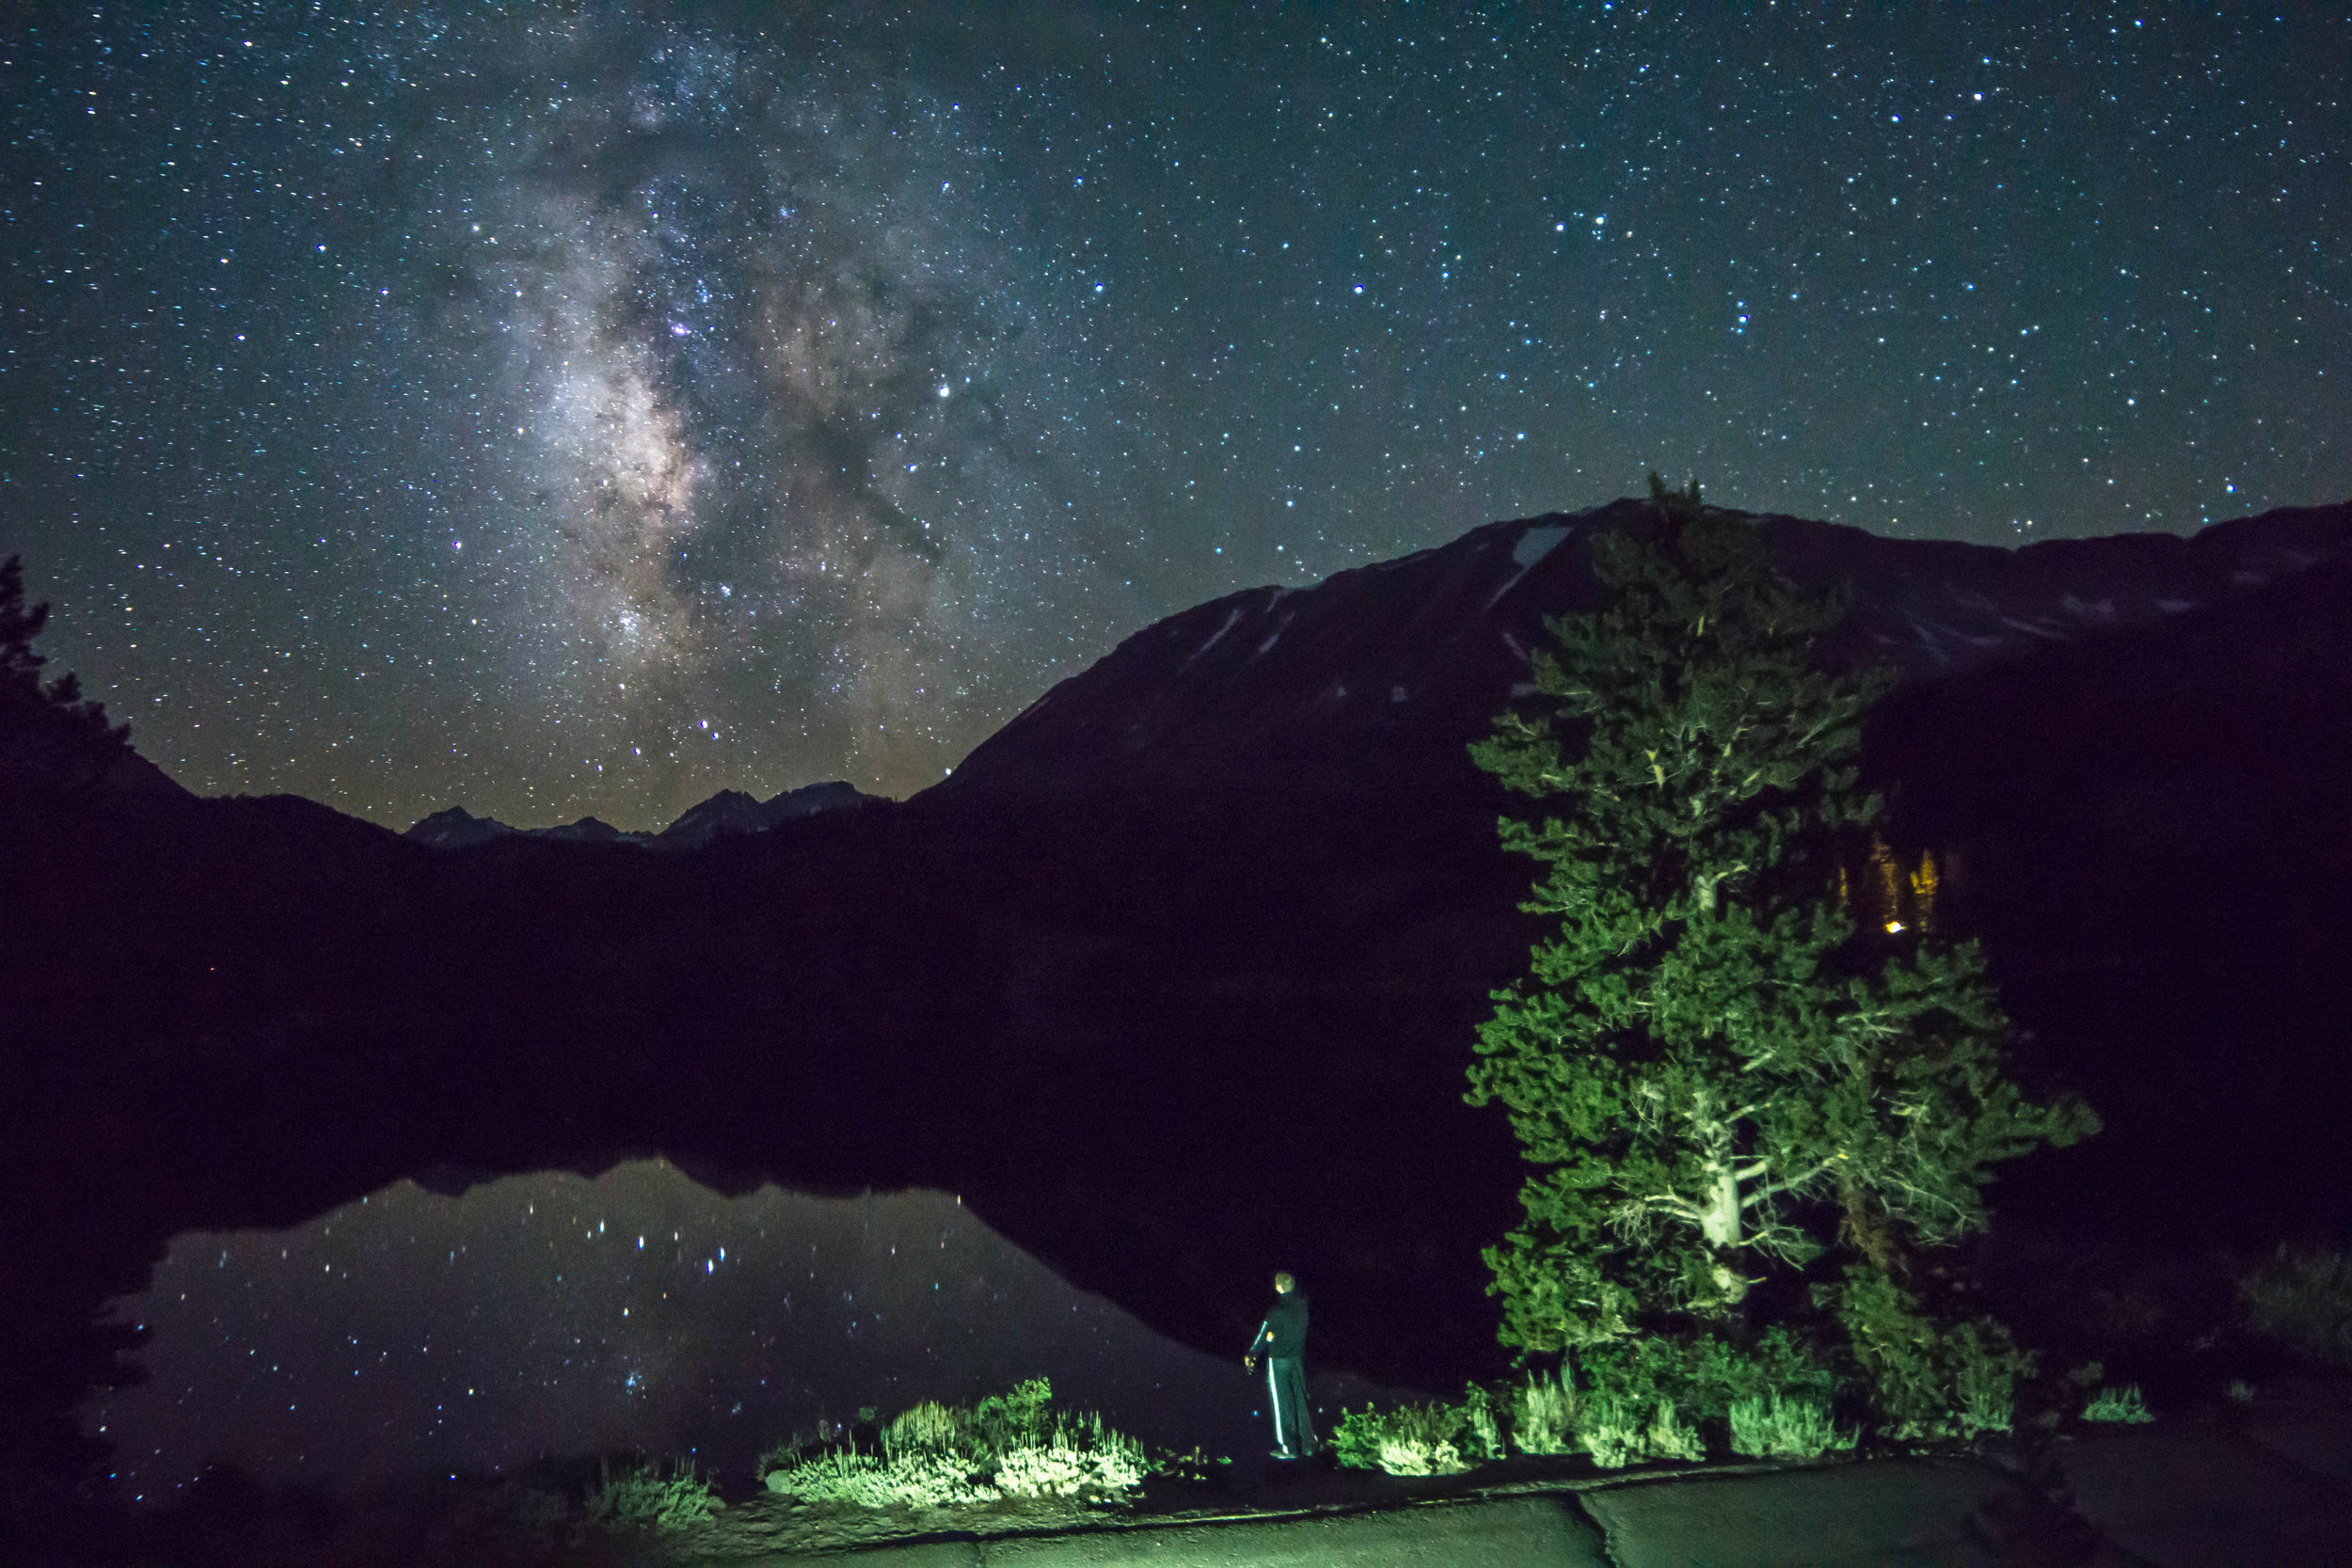 A 6 hour drive brings us beneath a starry sky cut by the galactic center of the Milky Way in the Eastern Sierras just outside of Bishop.